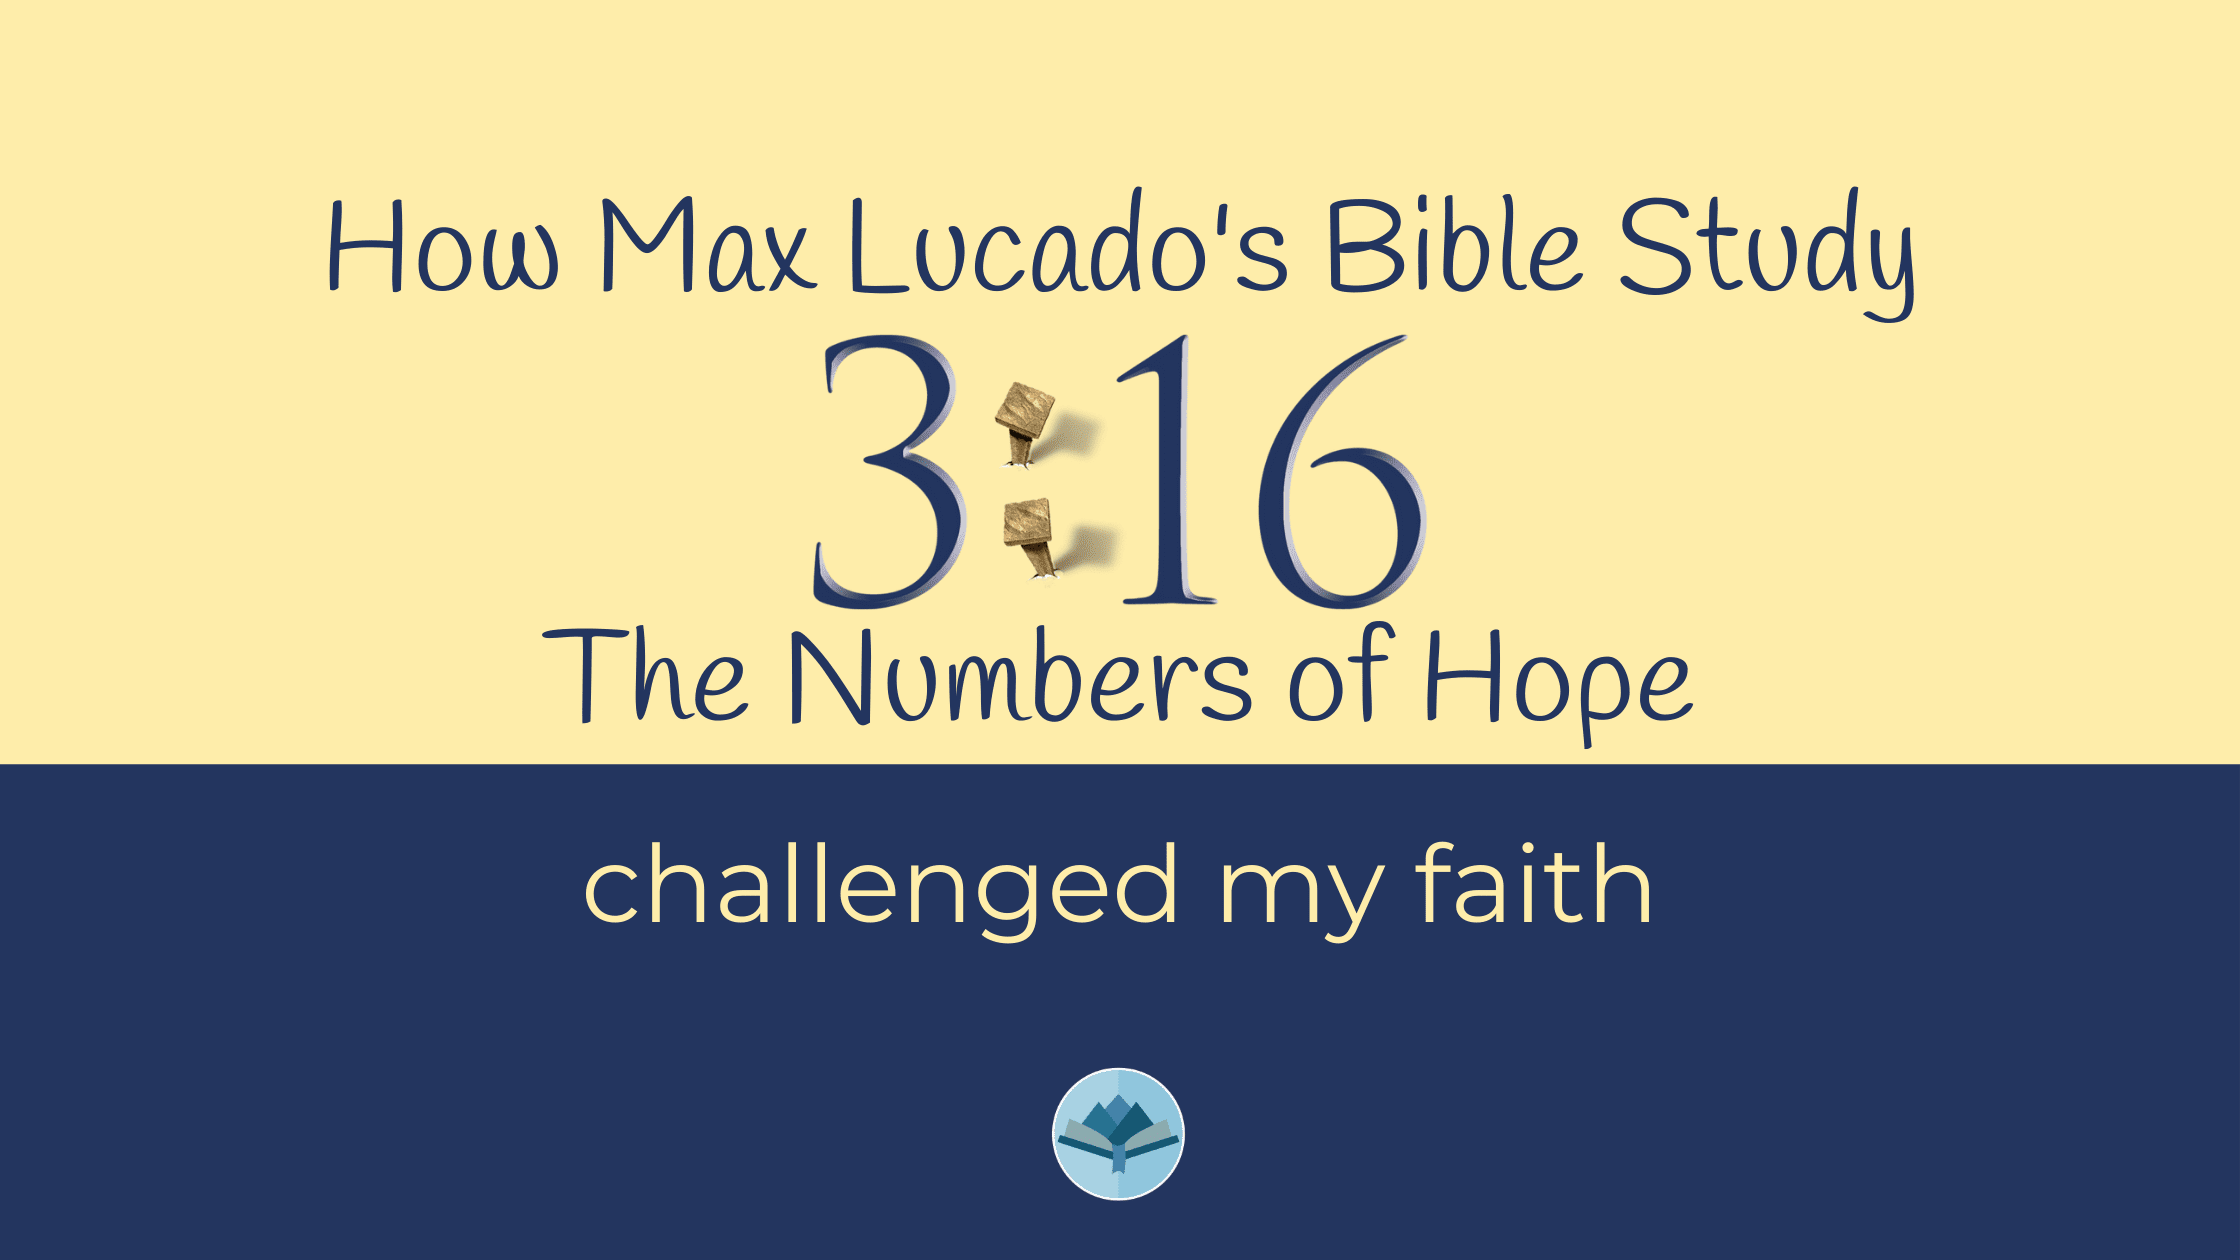 Max Lucado John 3:16 The Numbers of Hope Bible Study Review